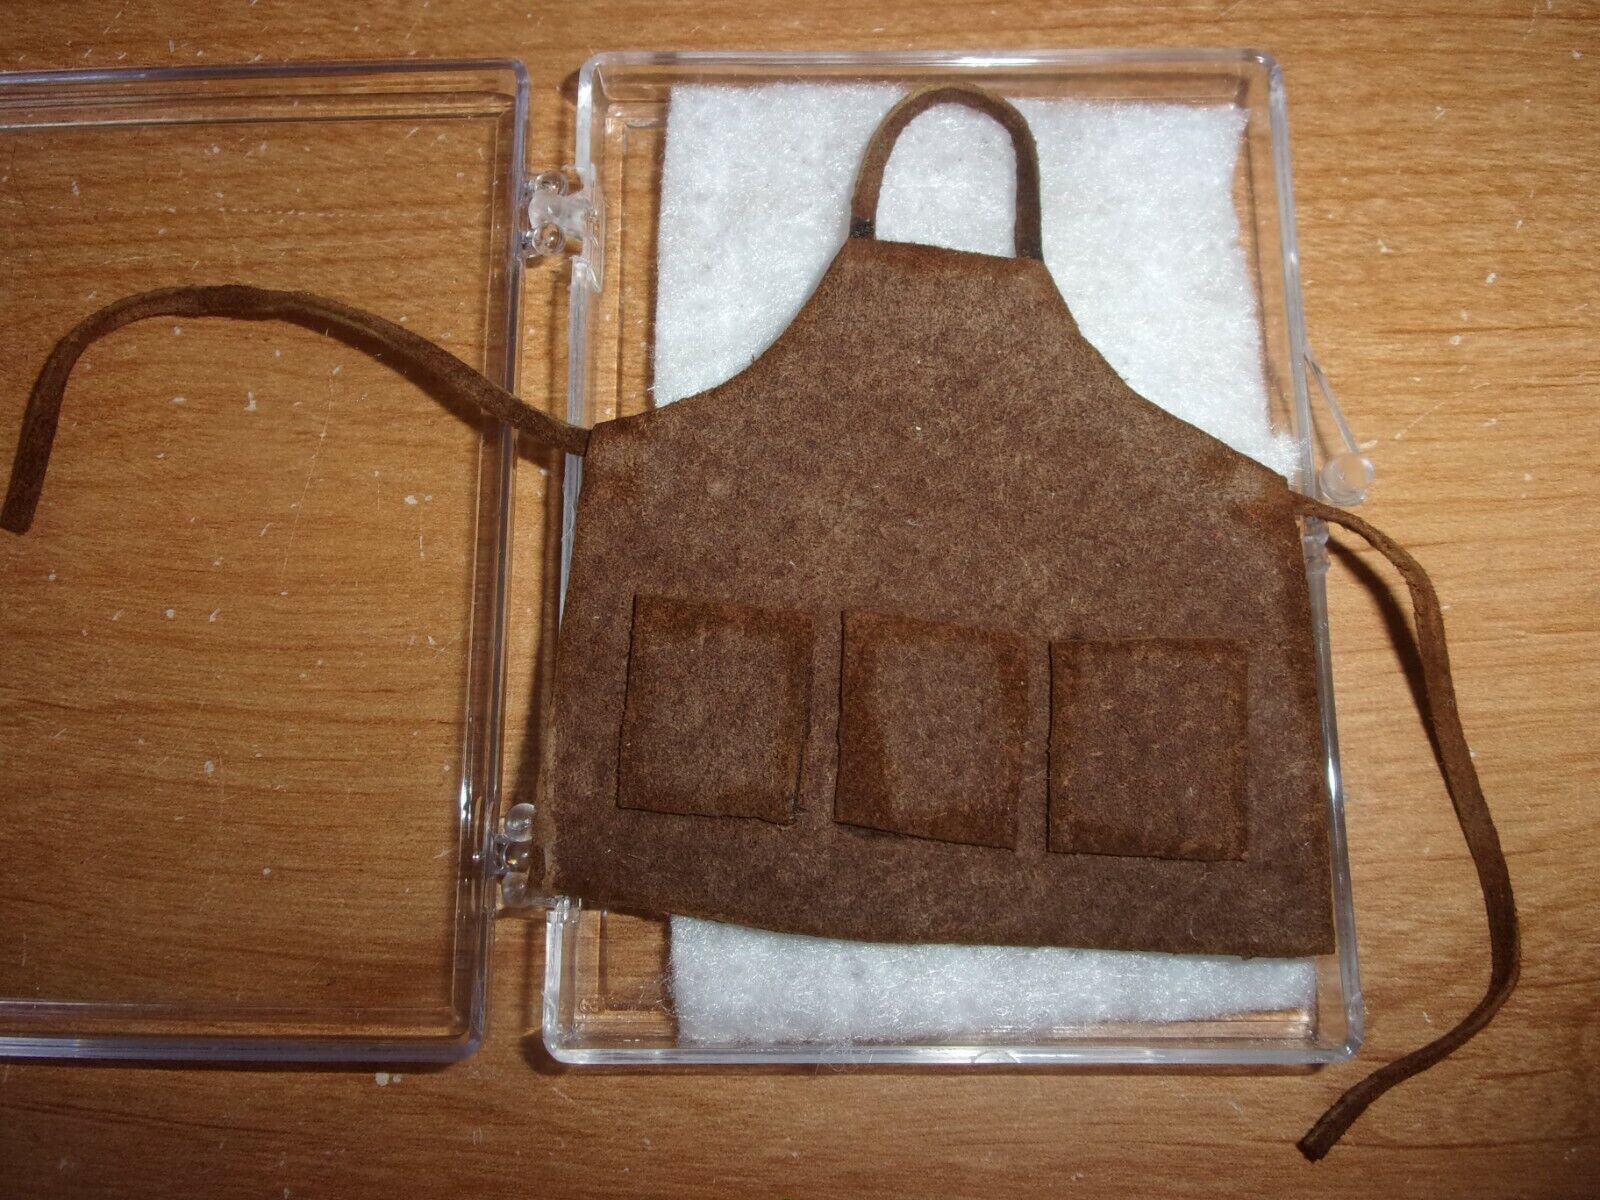 BROWN SUEDE WORK APRON WITH POCKETS - HANDCRAFTED - DOLL HOUSE MINIATURE